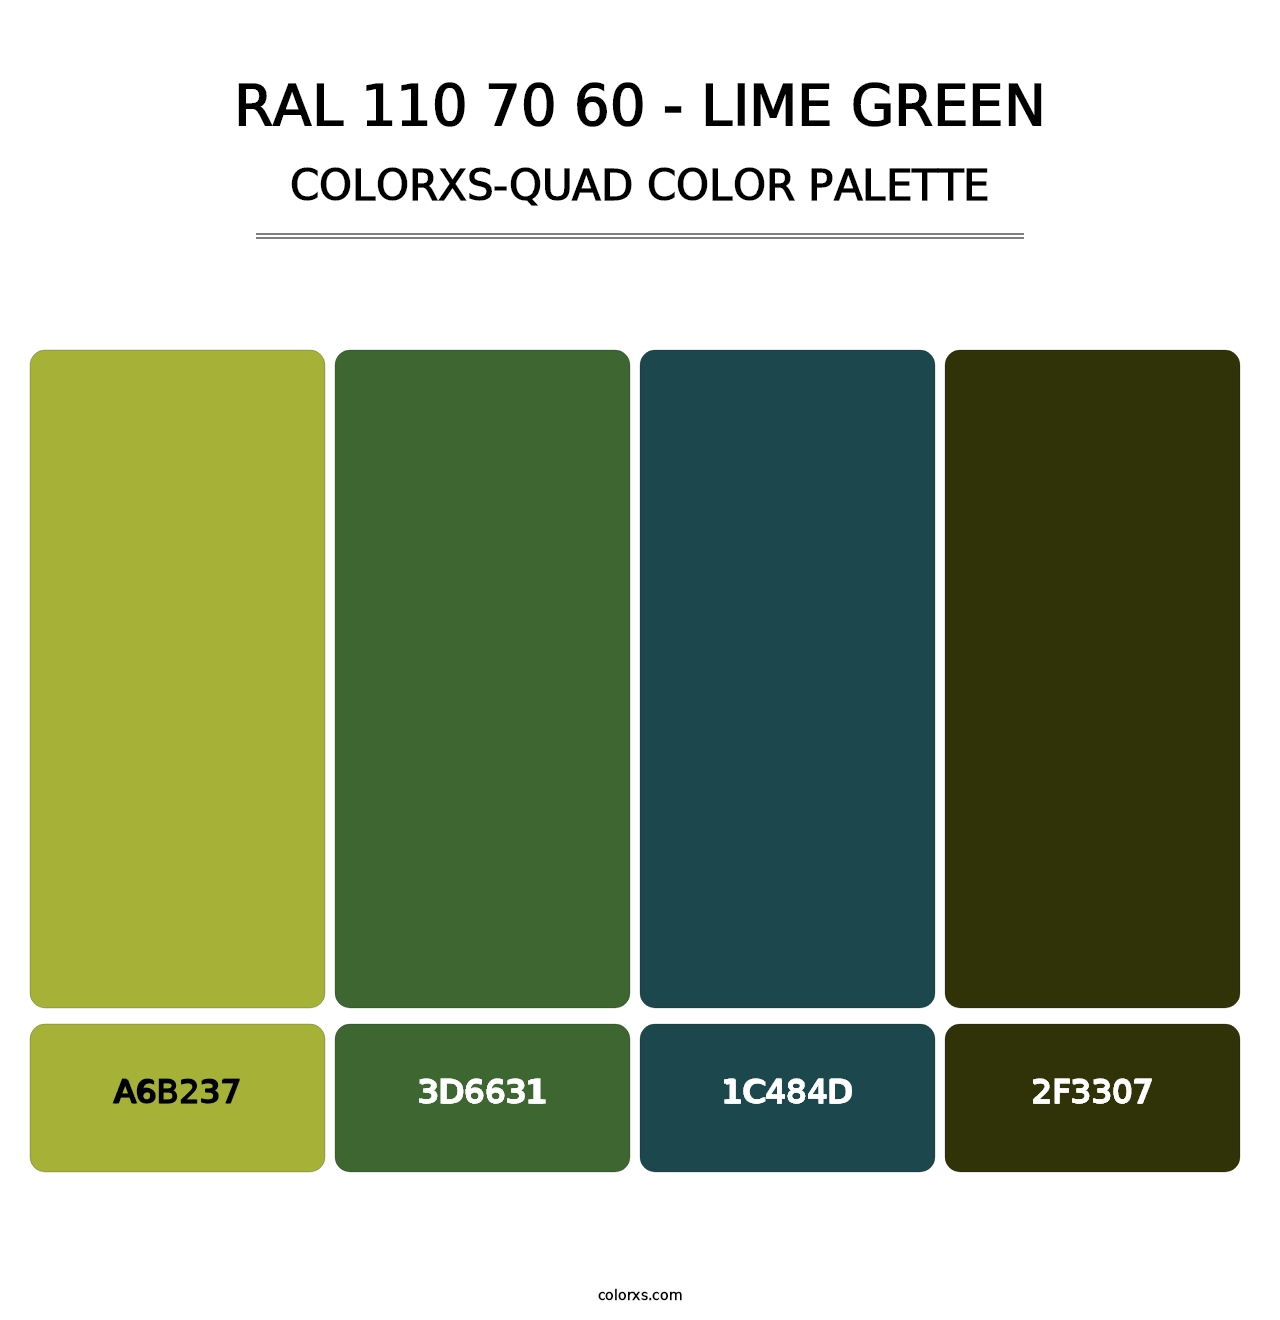 RAL 110 70 60 - Lime Green - Colorxs Quad Palette